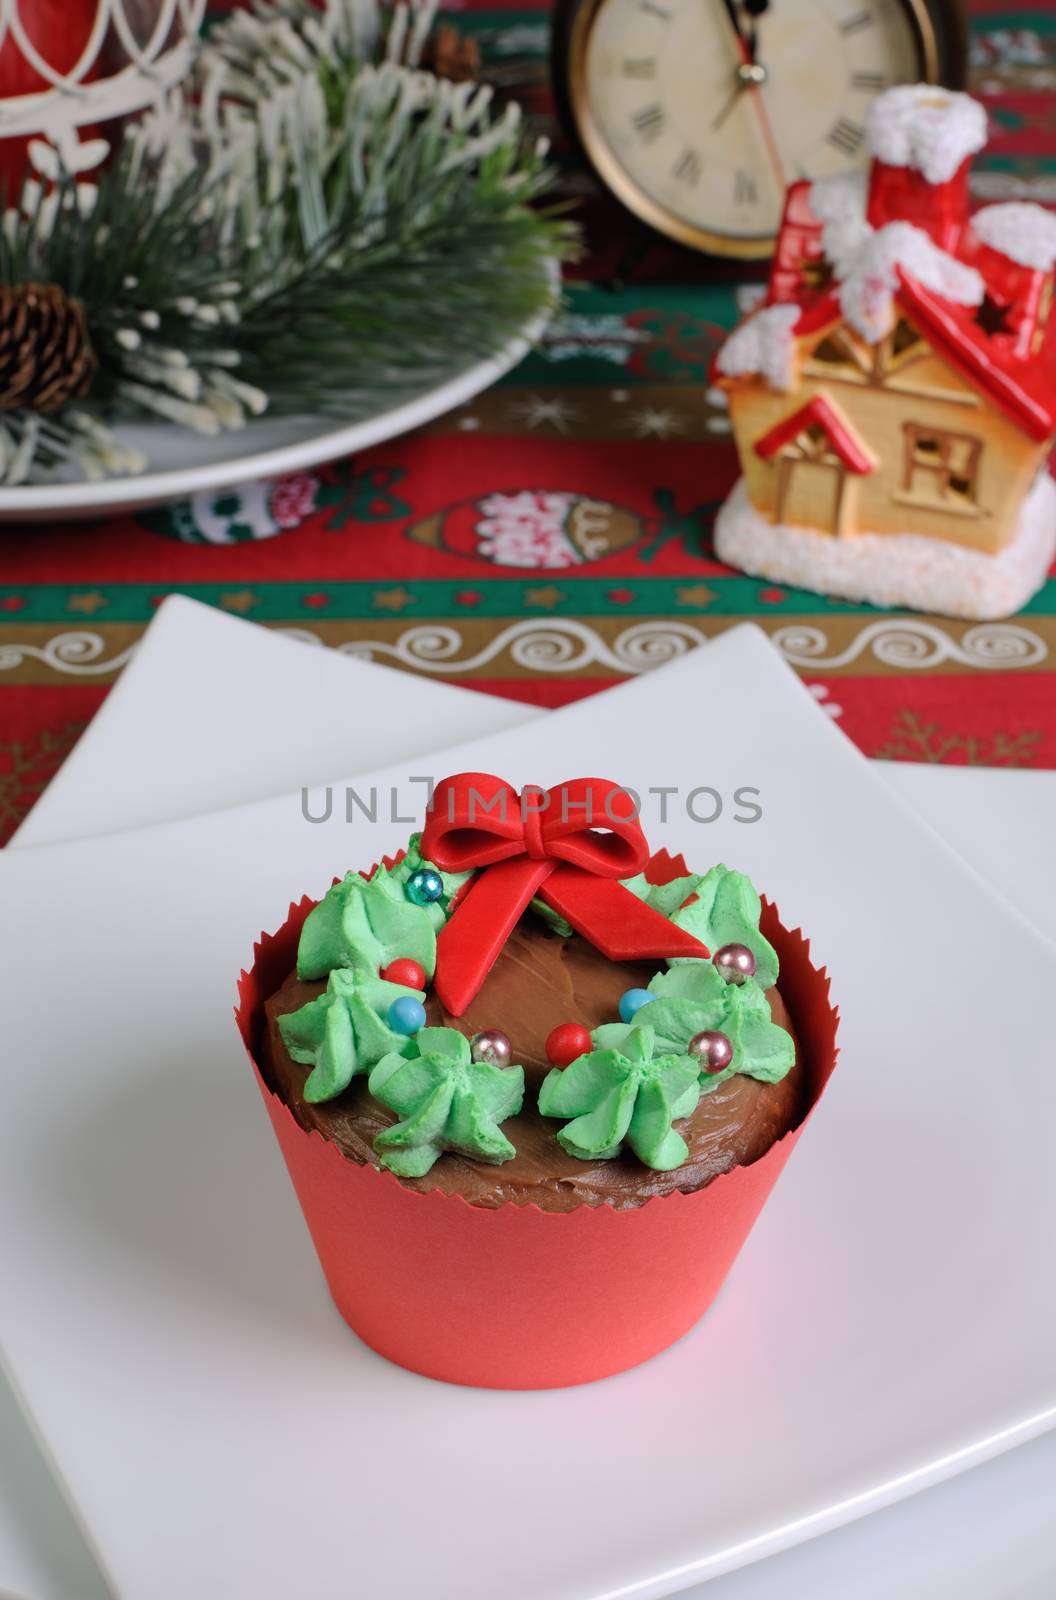 muffins in the form of a Christmas wreath by Apolonia